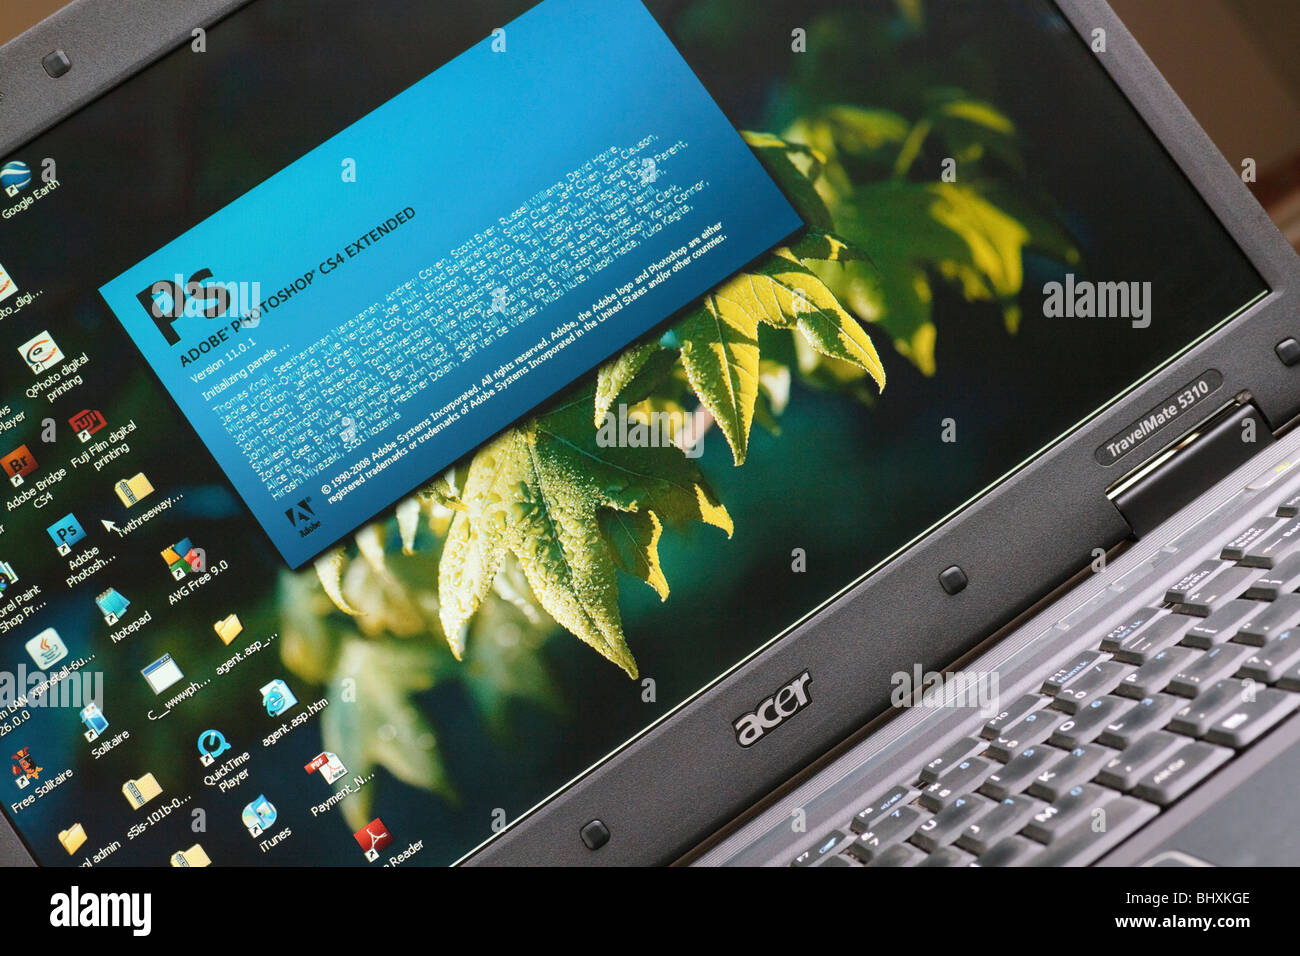 Abstract view of laptop showing software application opening on desktop. Stock Photo